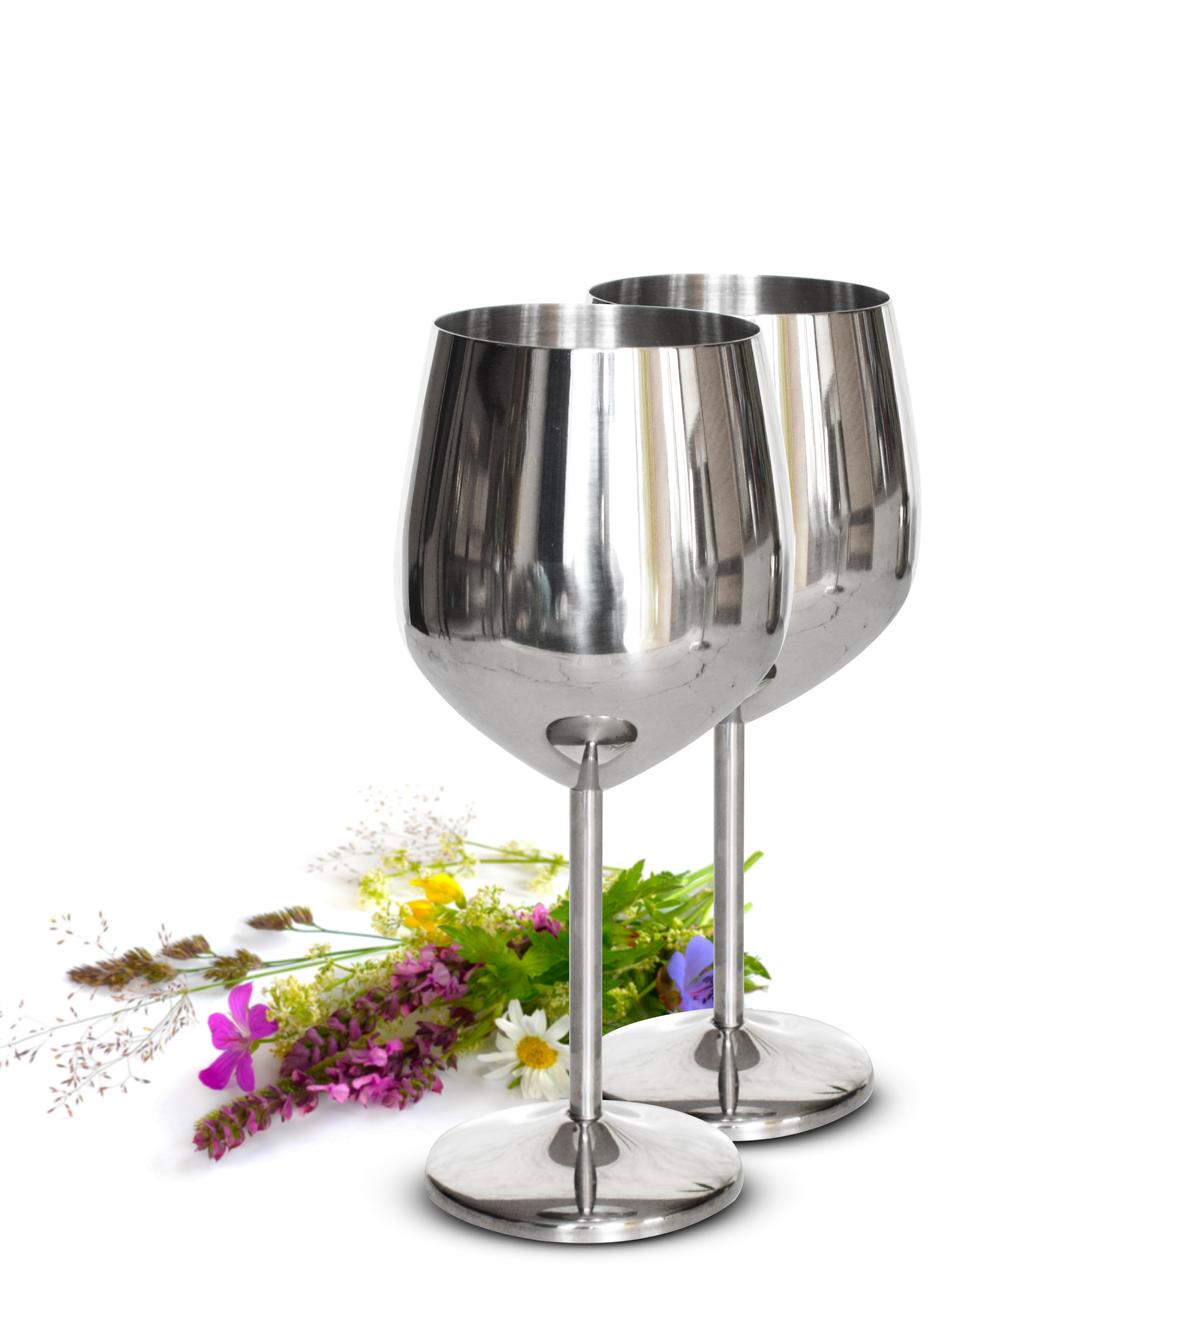 2 wine glasses 510ml silver stainless steel wine goblet/cup red wine glass unbreakable